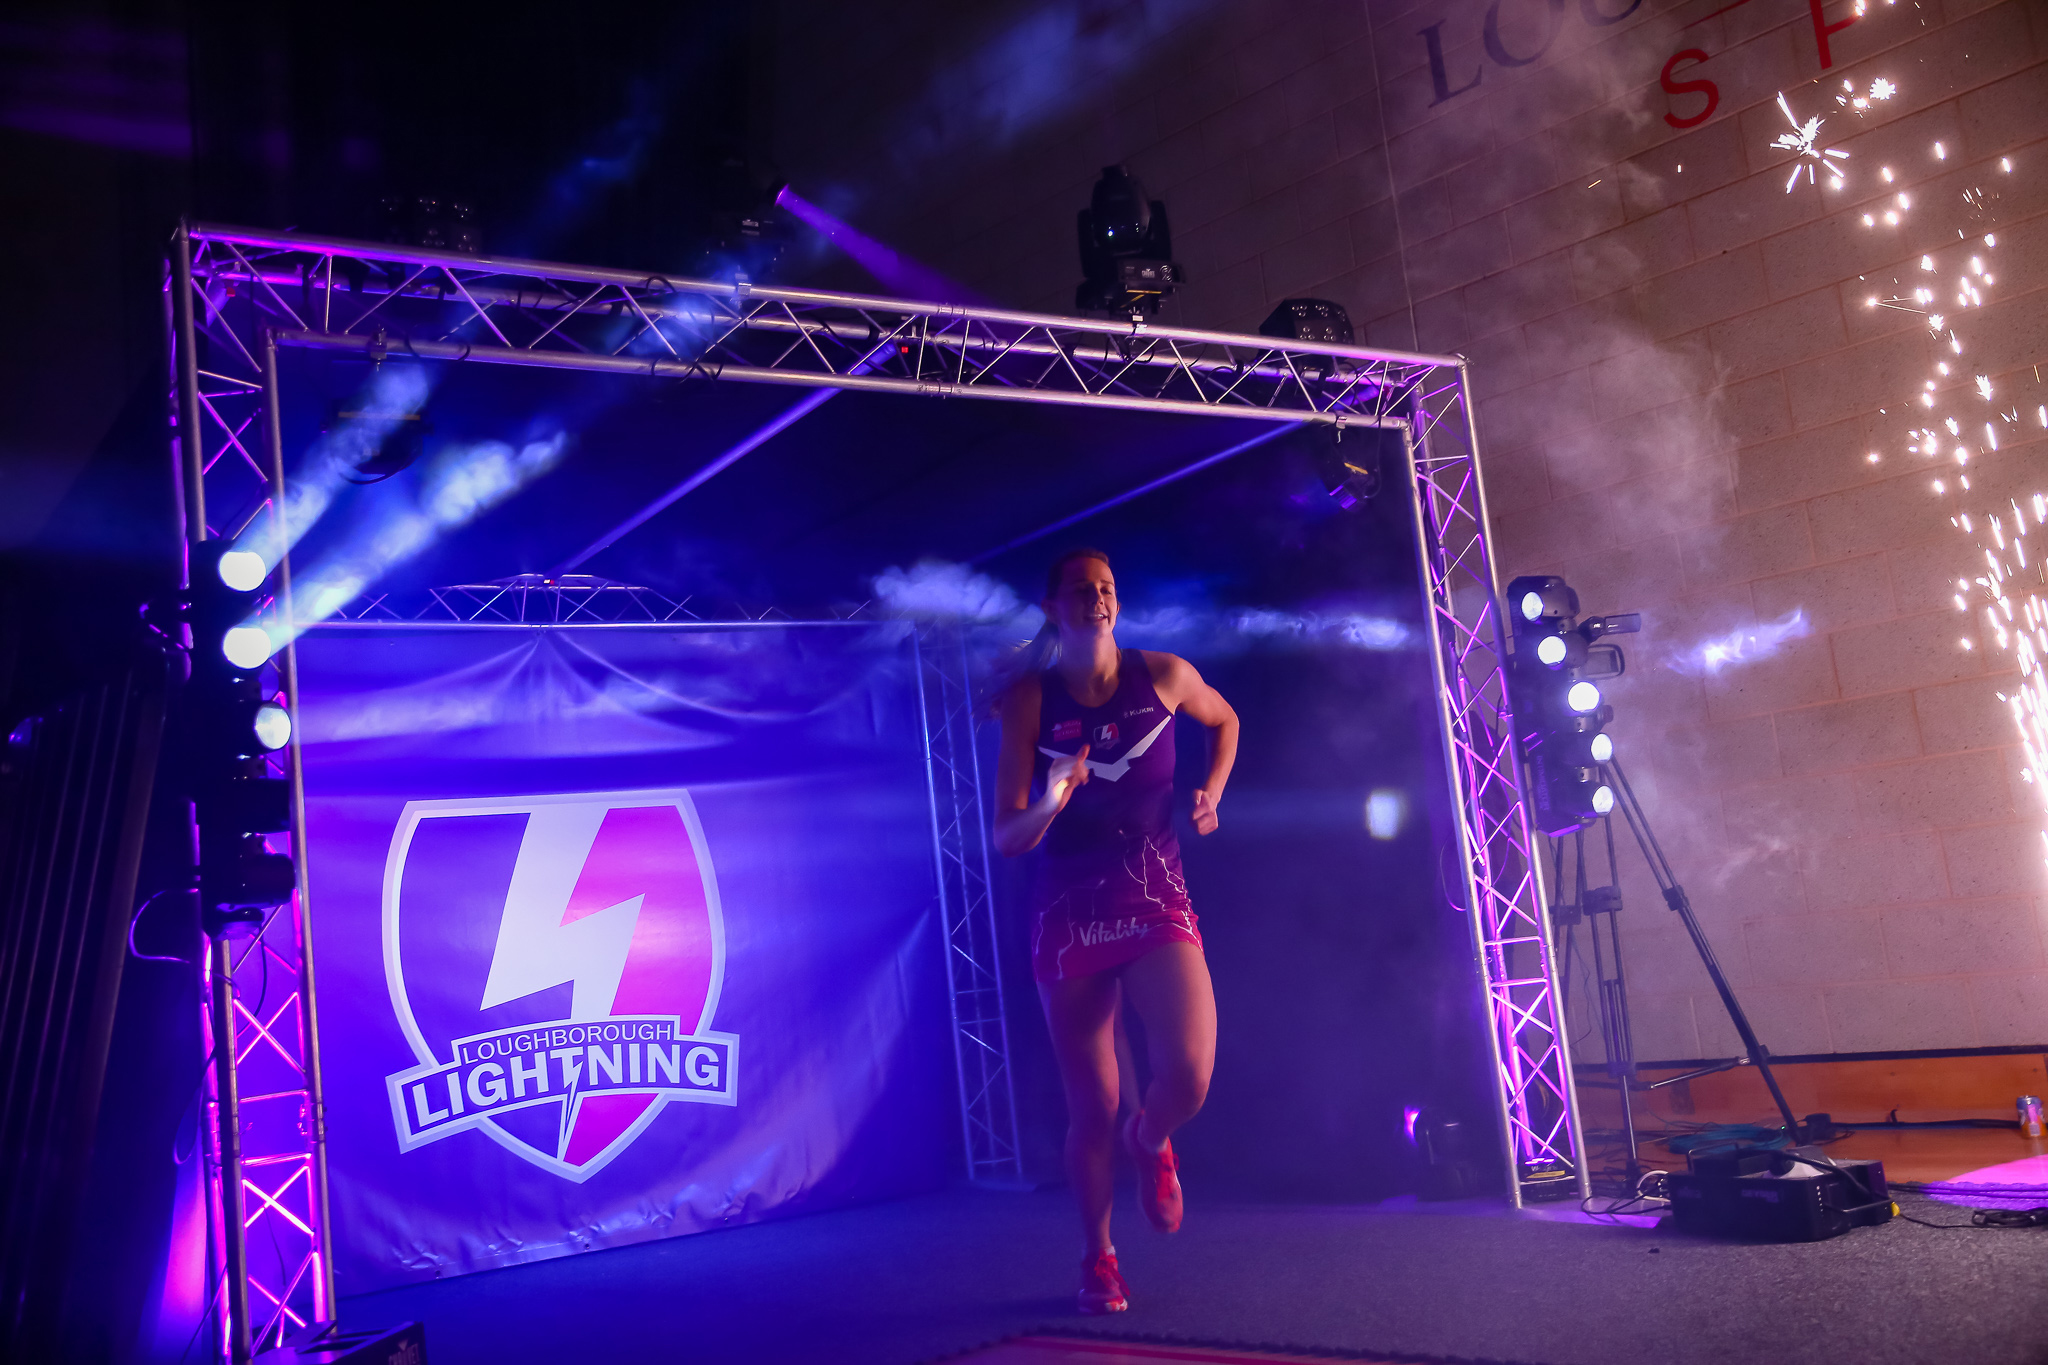 a person standing on a stage with the Lightning logo in the background